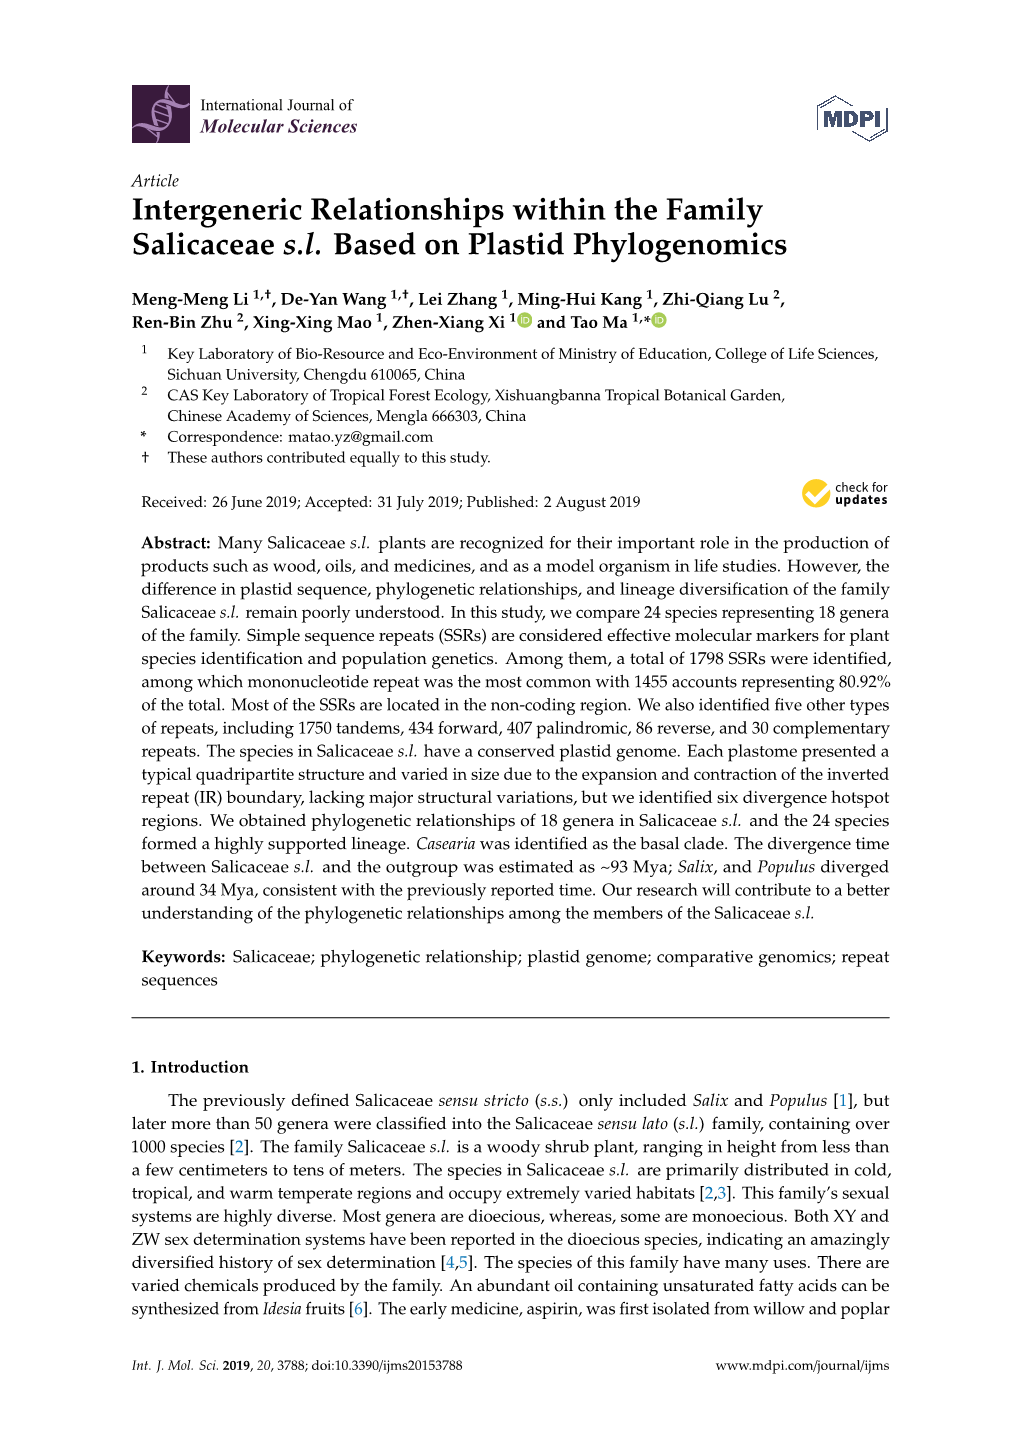 Intergeneric Relationships Within the Family Salicaceae S.L. Based on Plastid Phylogenomics